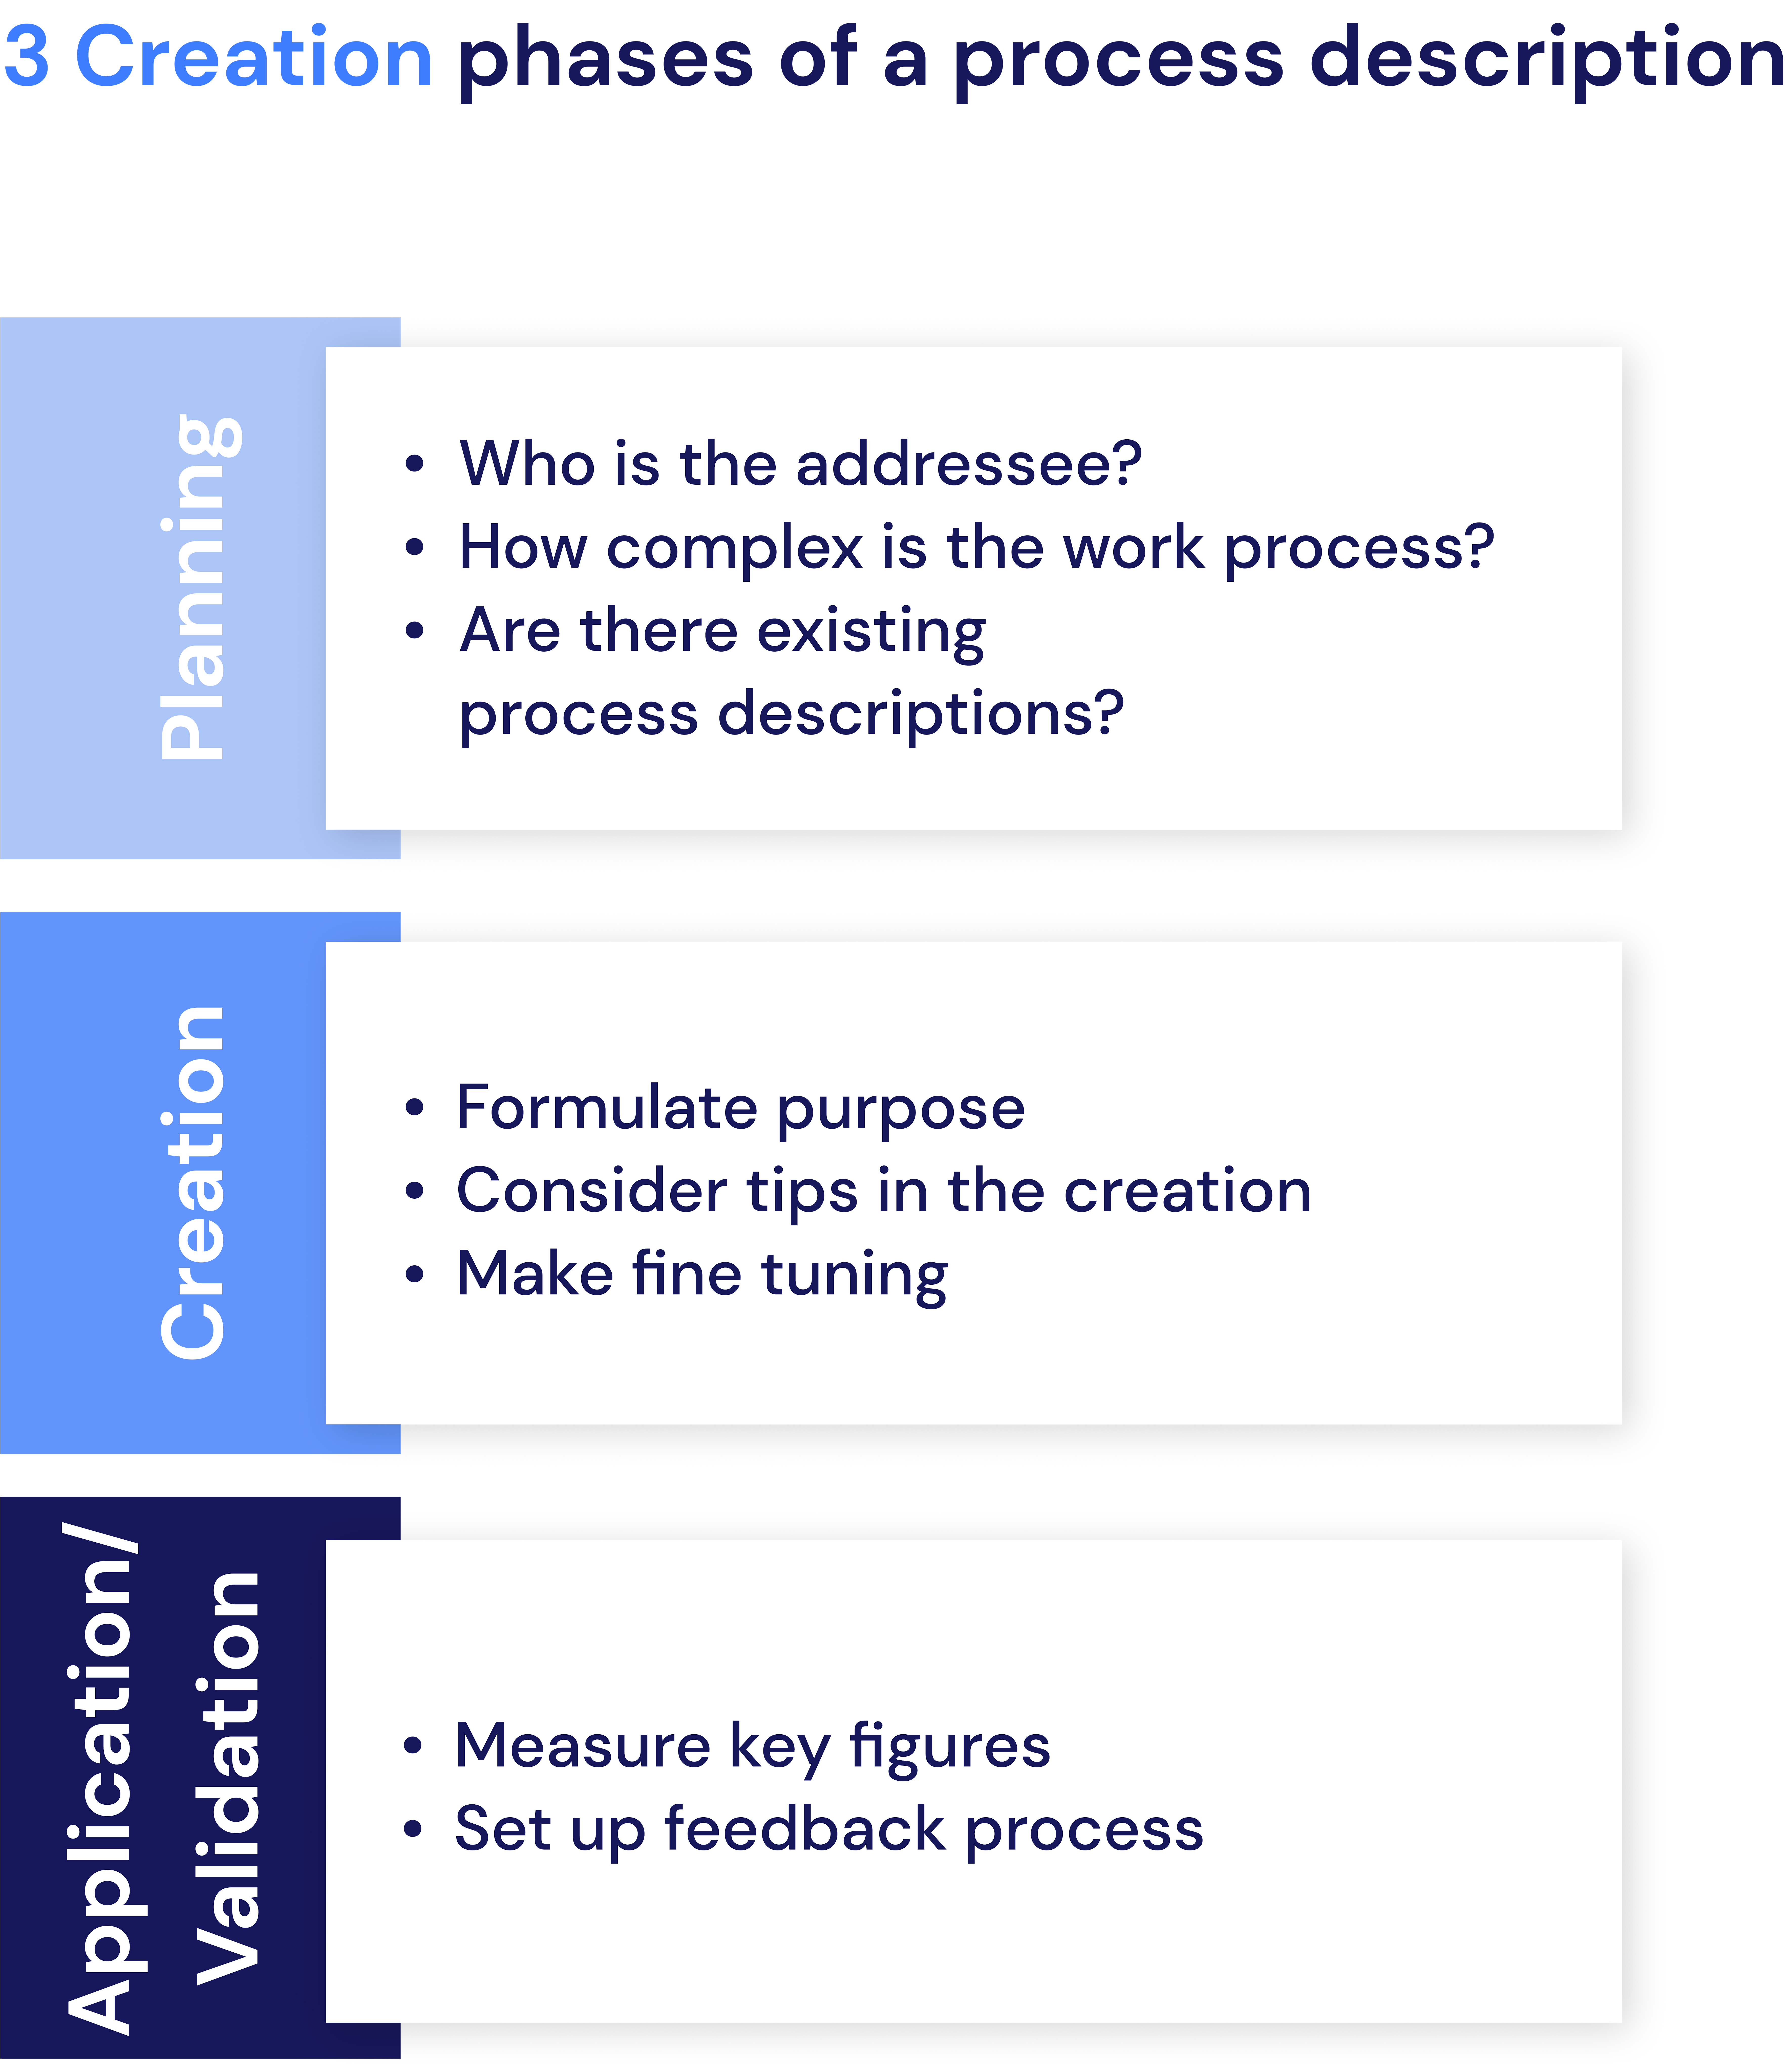 Creation phases of a process description